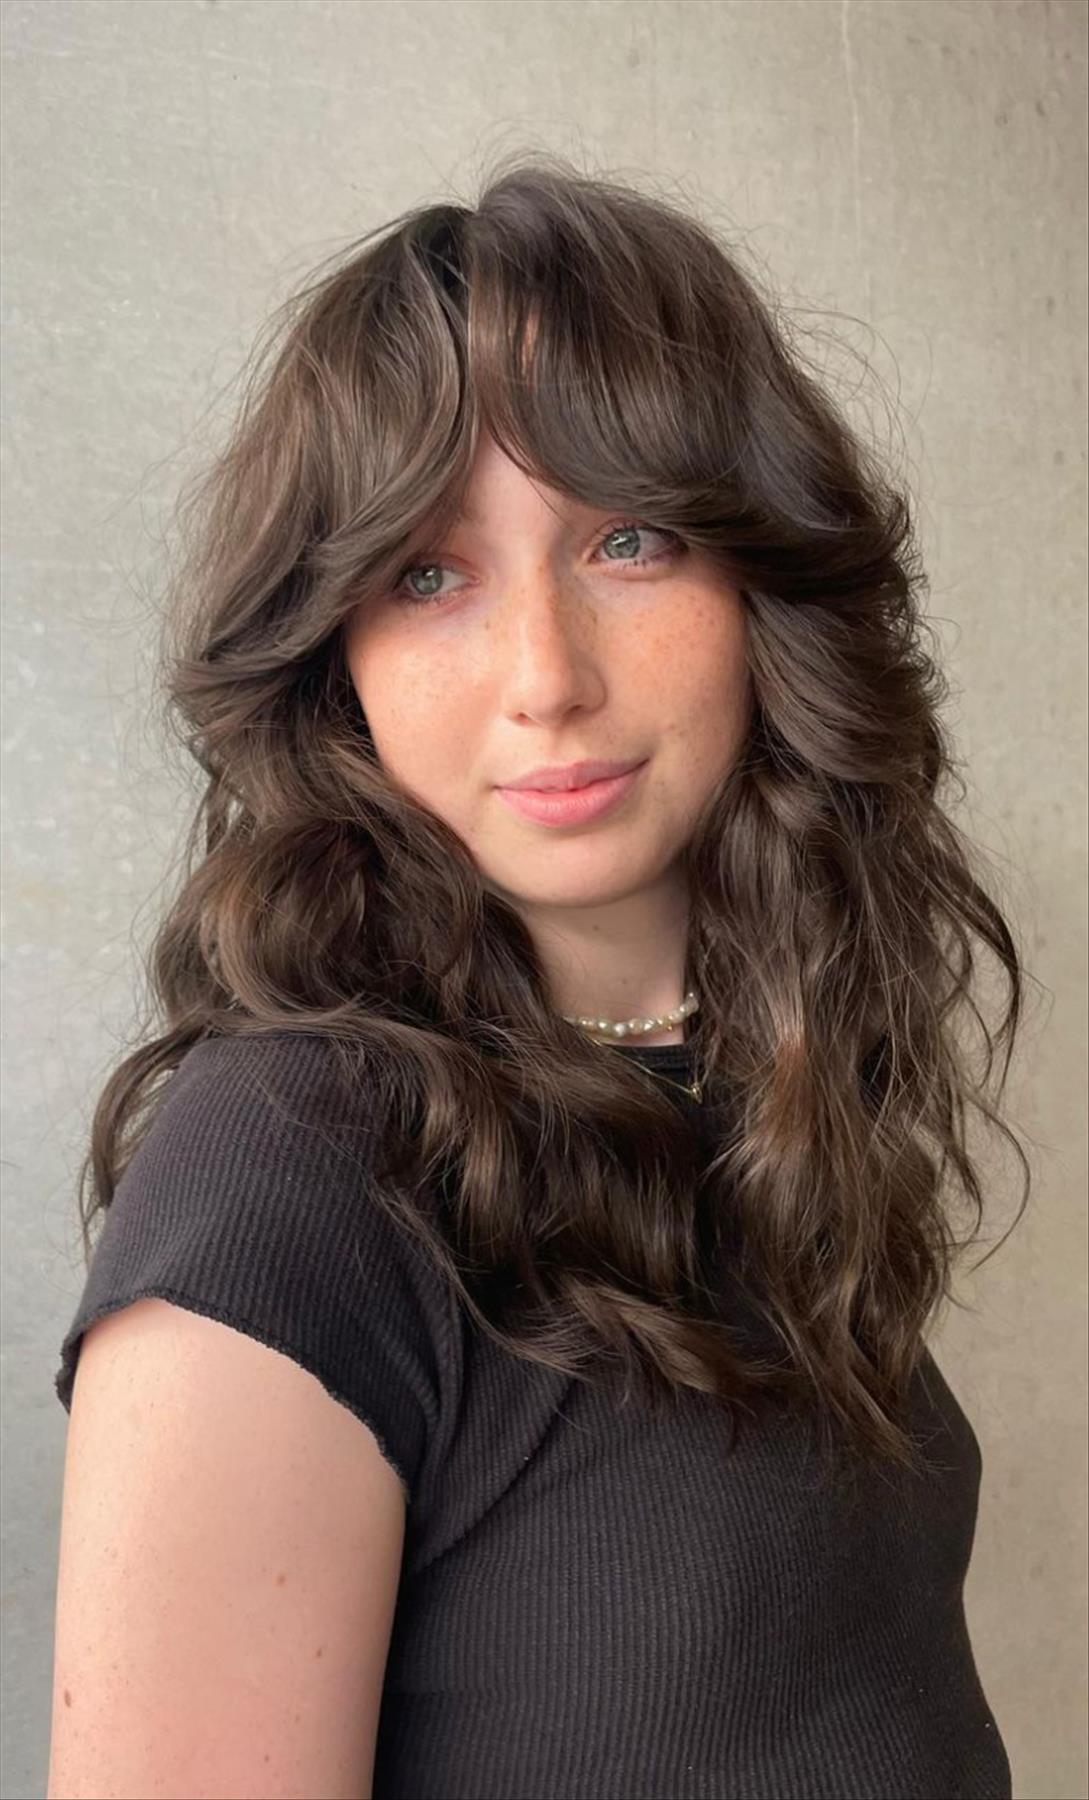 Stunning hairstyles with bangs and layers for cool girls